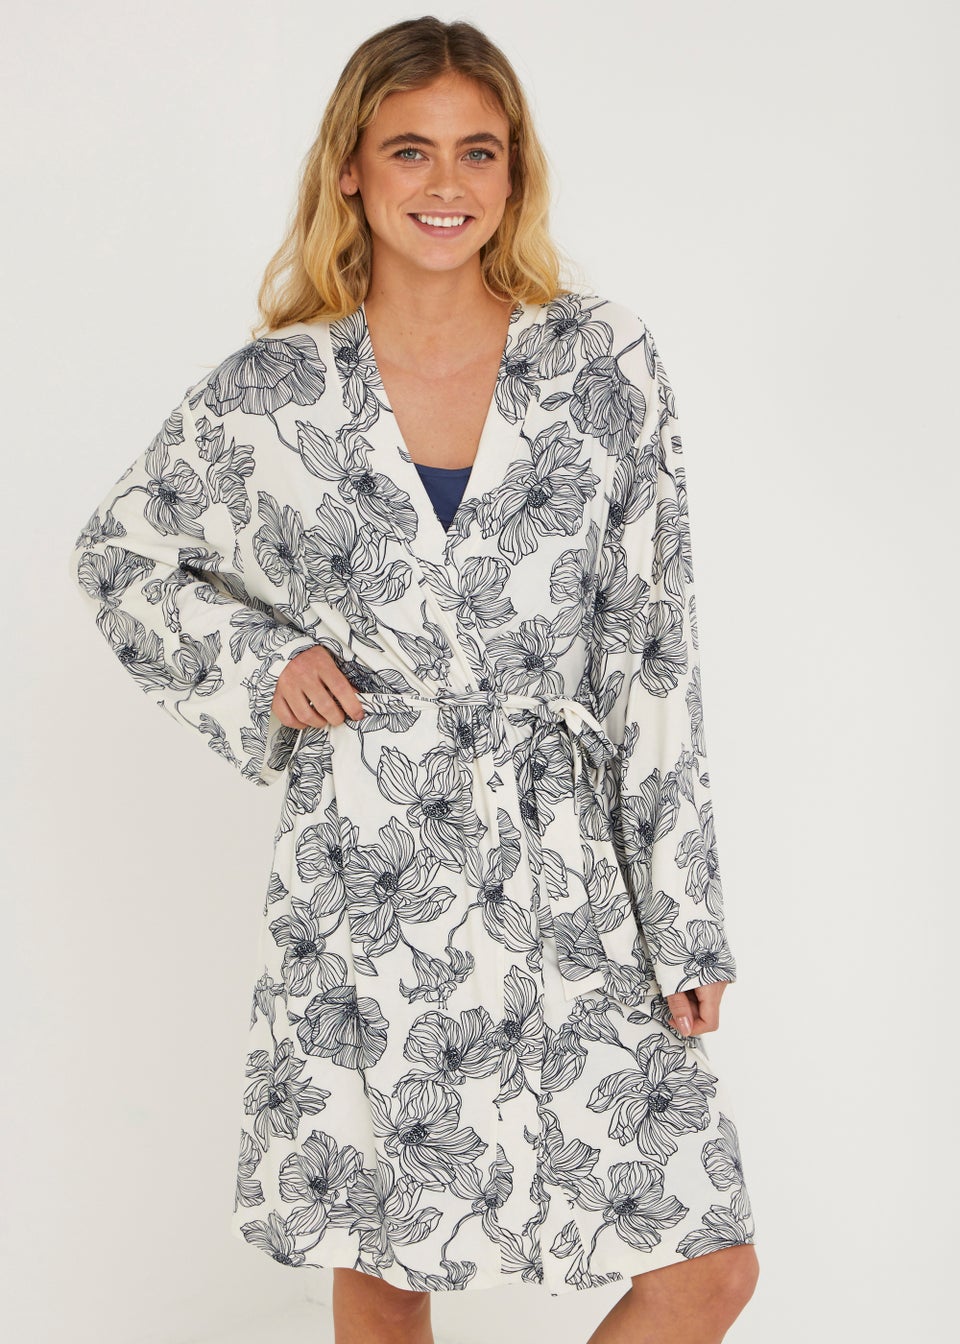 ✓ Women's dressing gown with hearts | LOHE ®